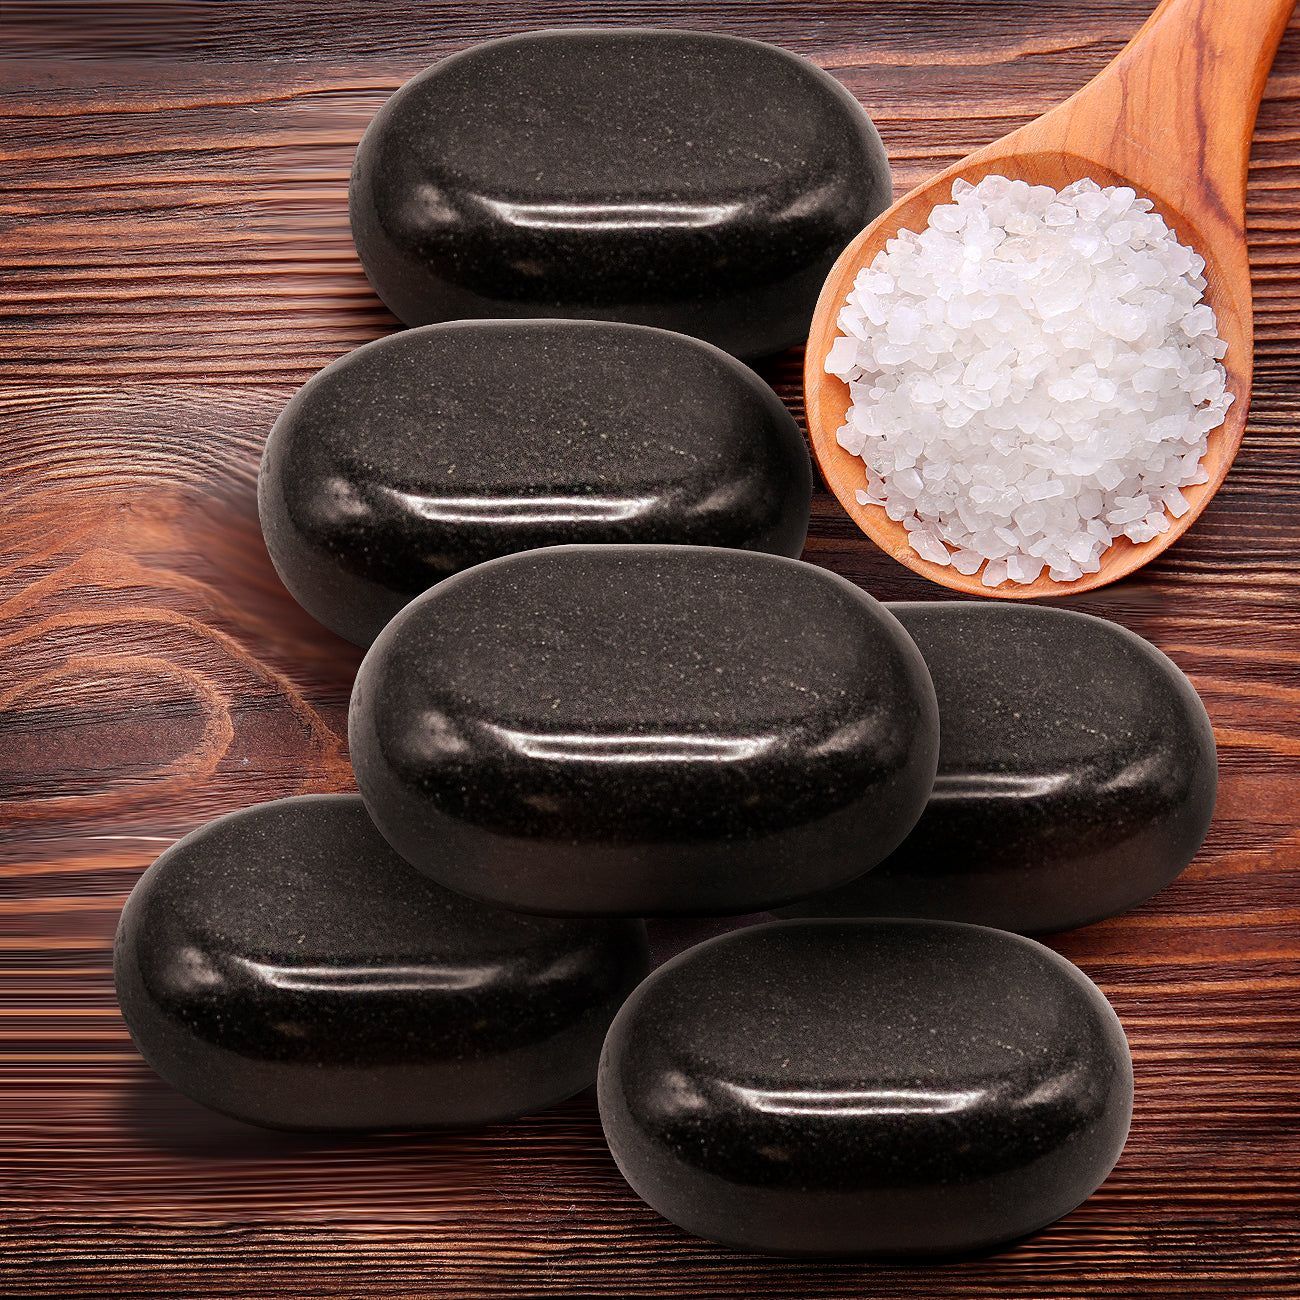 Sivan Health and Fitness Black Basalt Stone Set for Spas, Massage Therapy and more